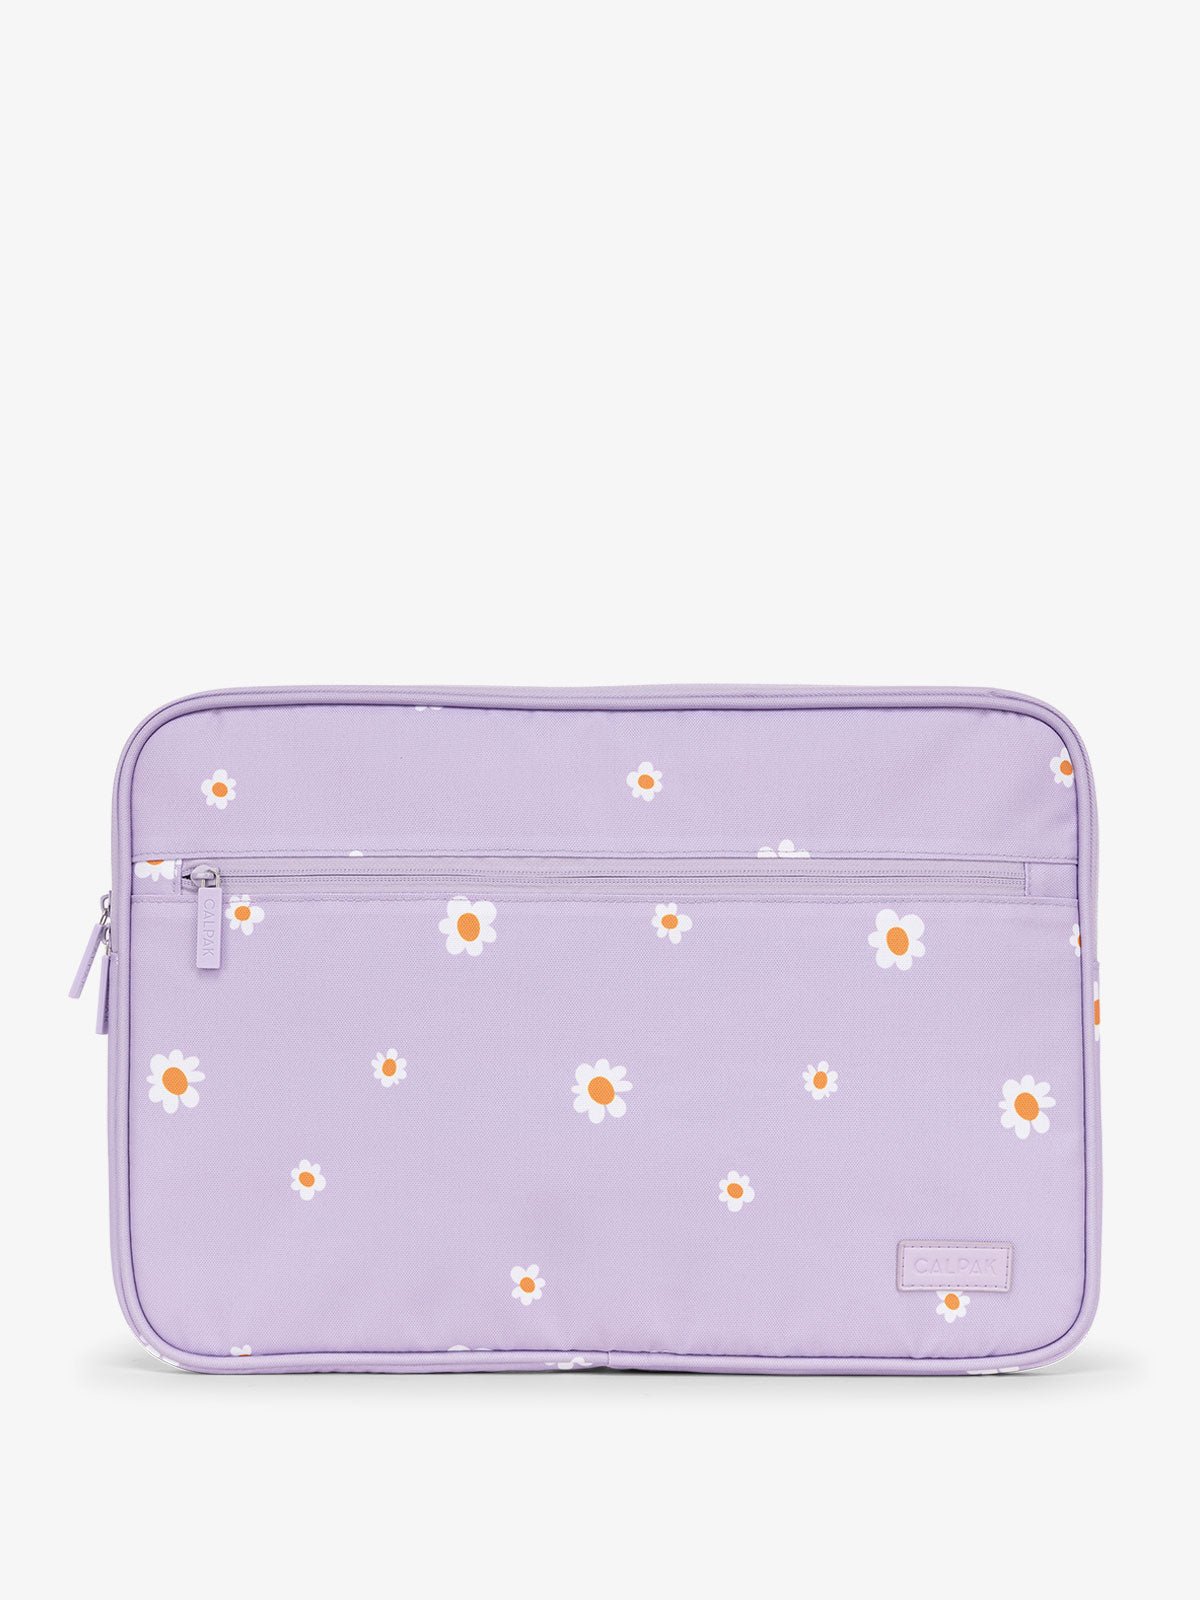 CALPAK 15-17 Inch Padded Laptop with zippered front pocket in orchid fields